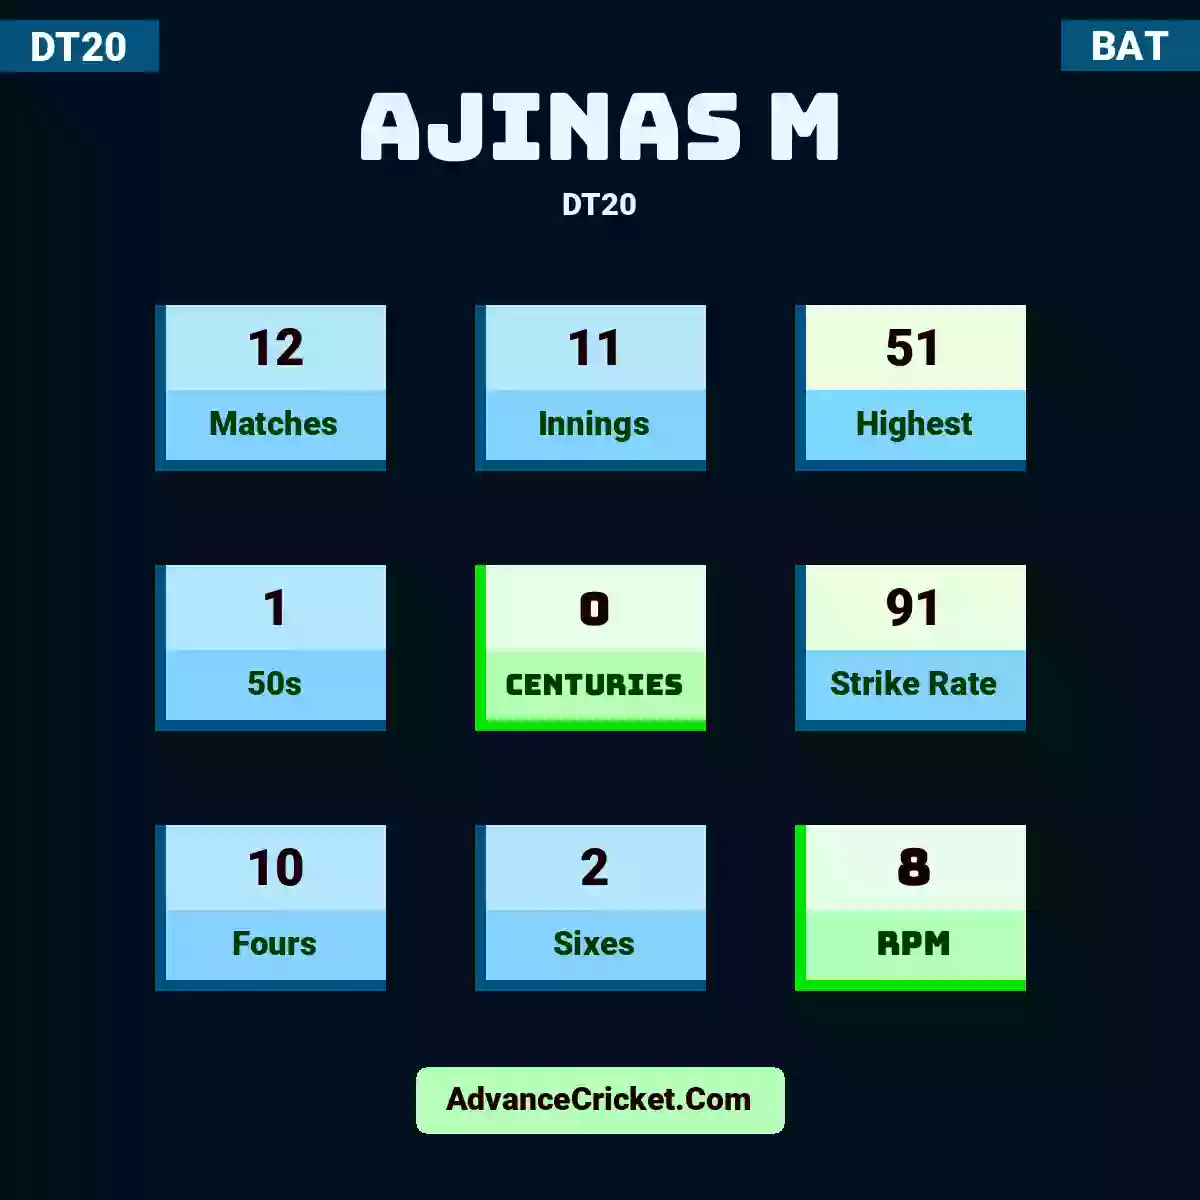 Ajinas M DT20 , Ajinas M played 12 matches, scored 51 runs as highest, 1 half-centuries, and 0 centuries, with a strike rate of 91. A.m hit 10 fours and 2 sixes, with an RPM of 8.